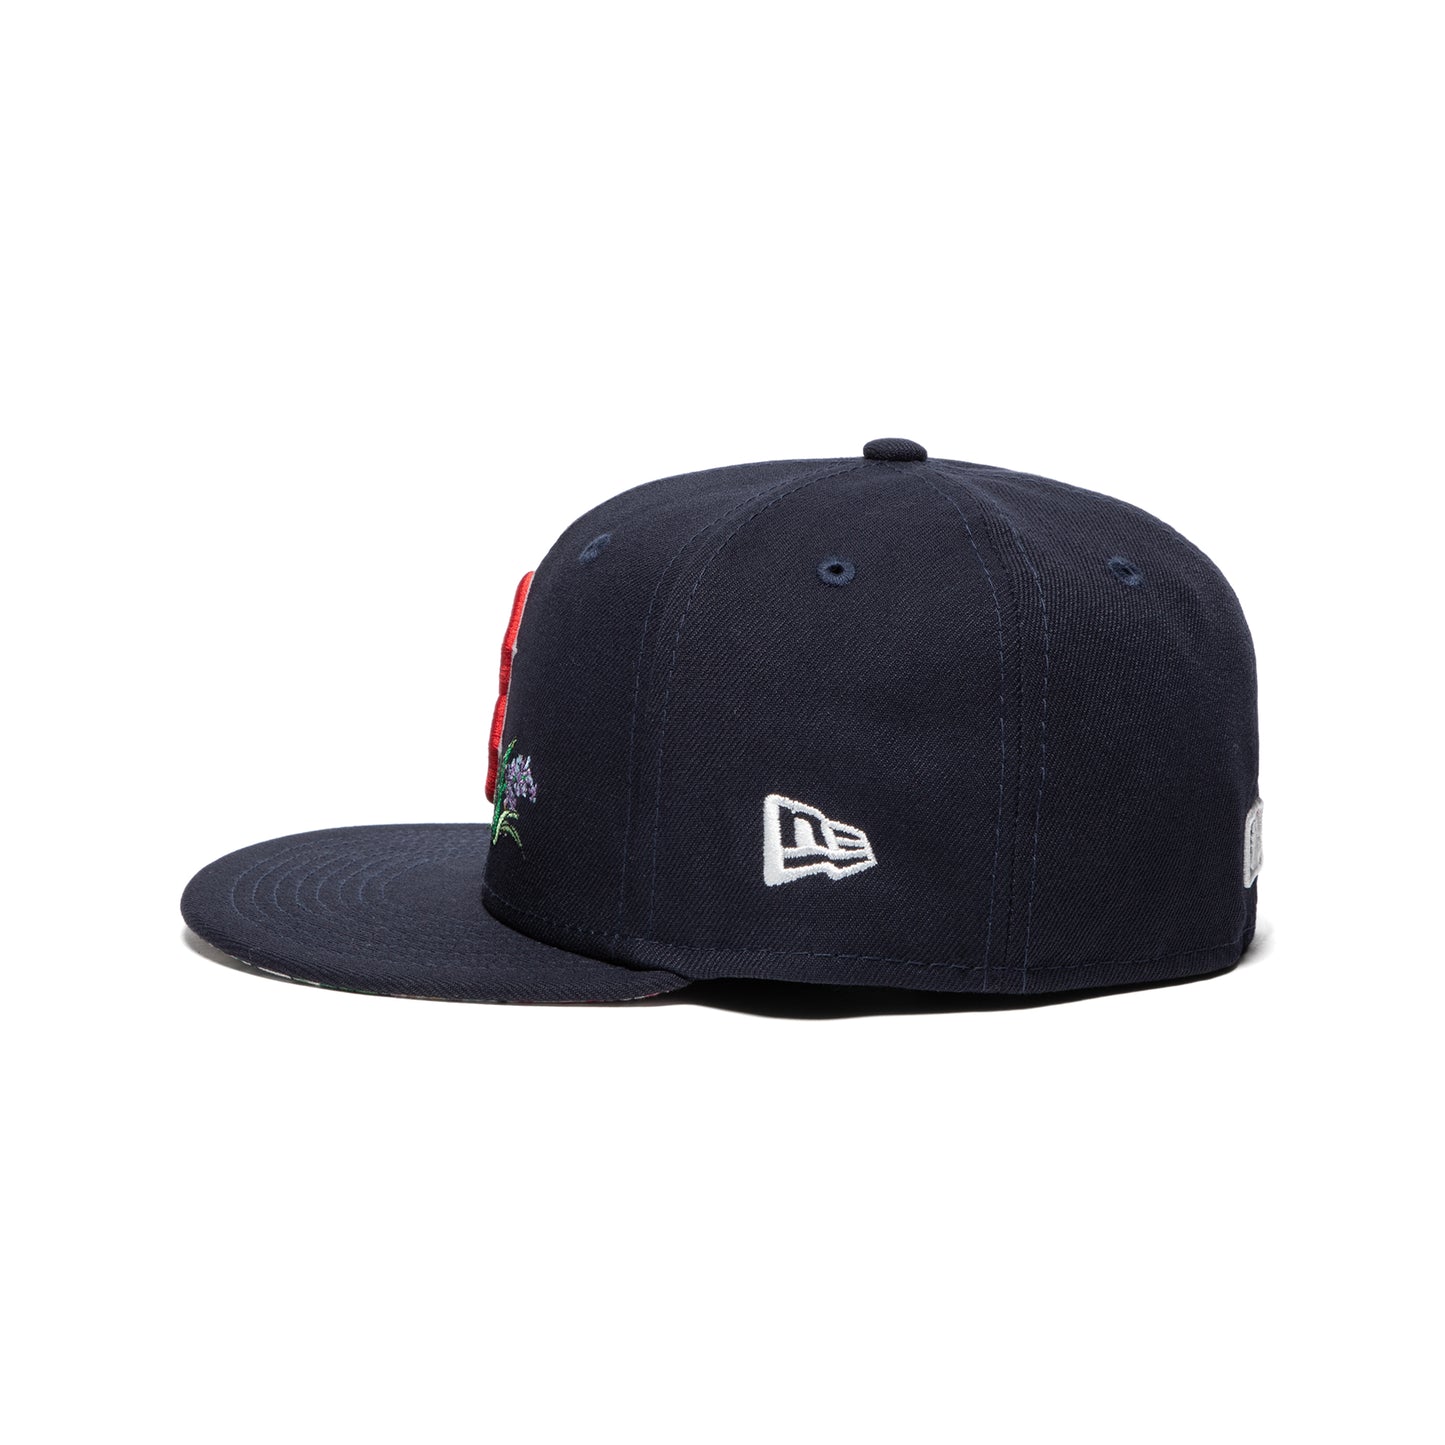 New Era Floral Boston Red Sox 59Fifty Fitted Hat (Navy)